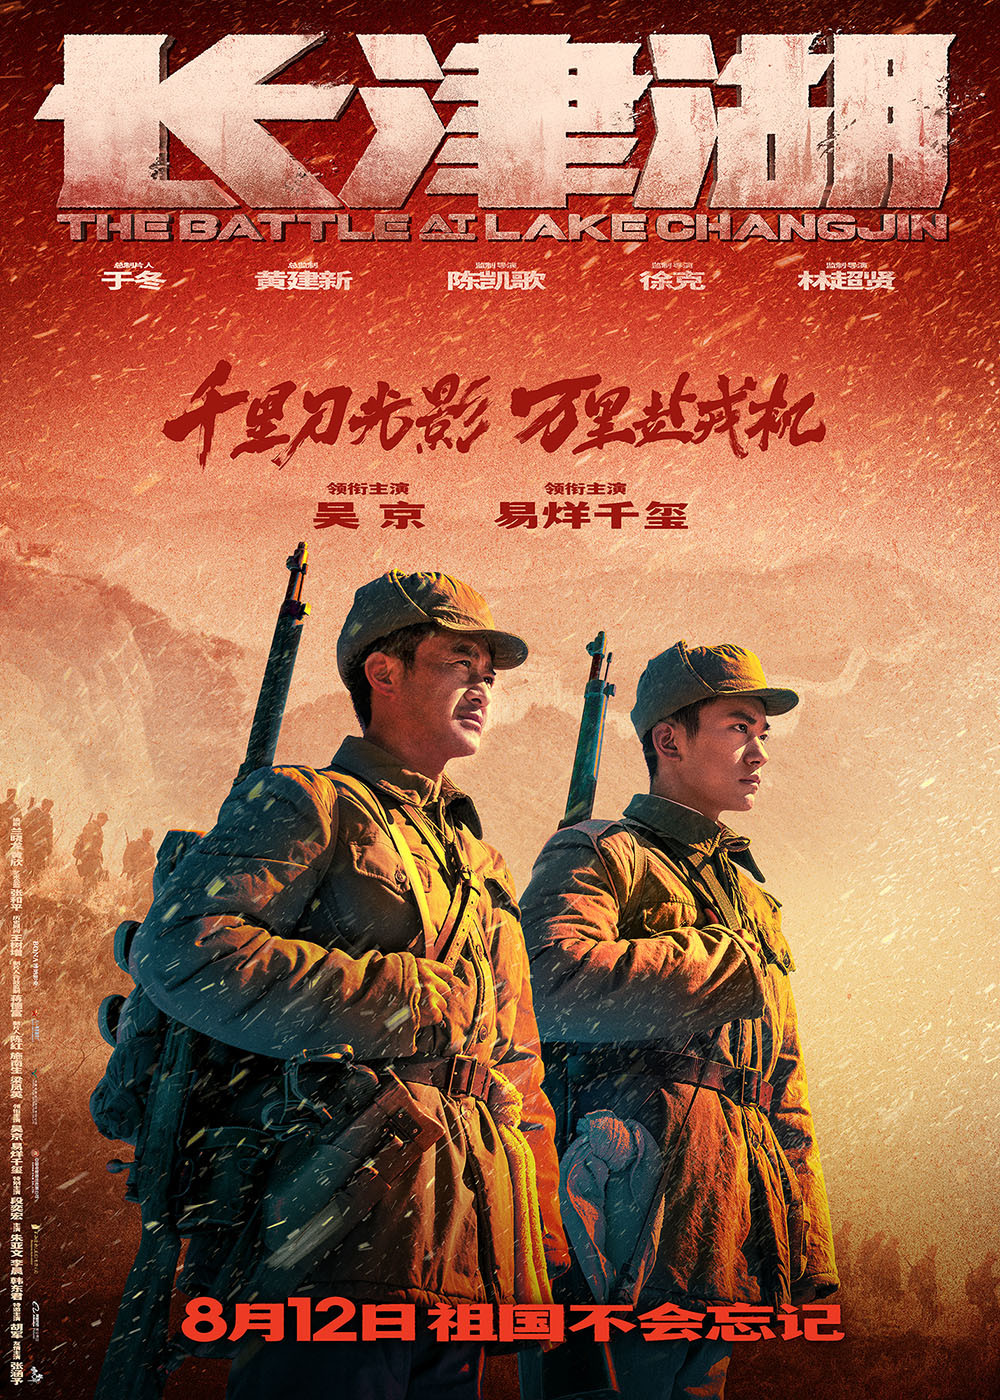 "Changjin Lake" reached the top of the box office, after "Li Huanying